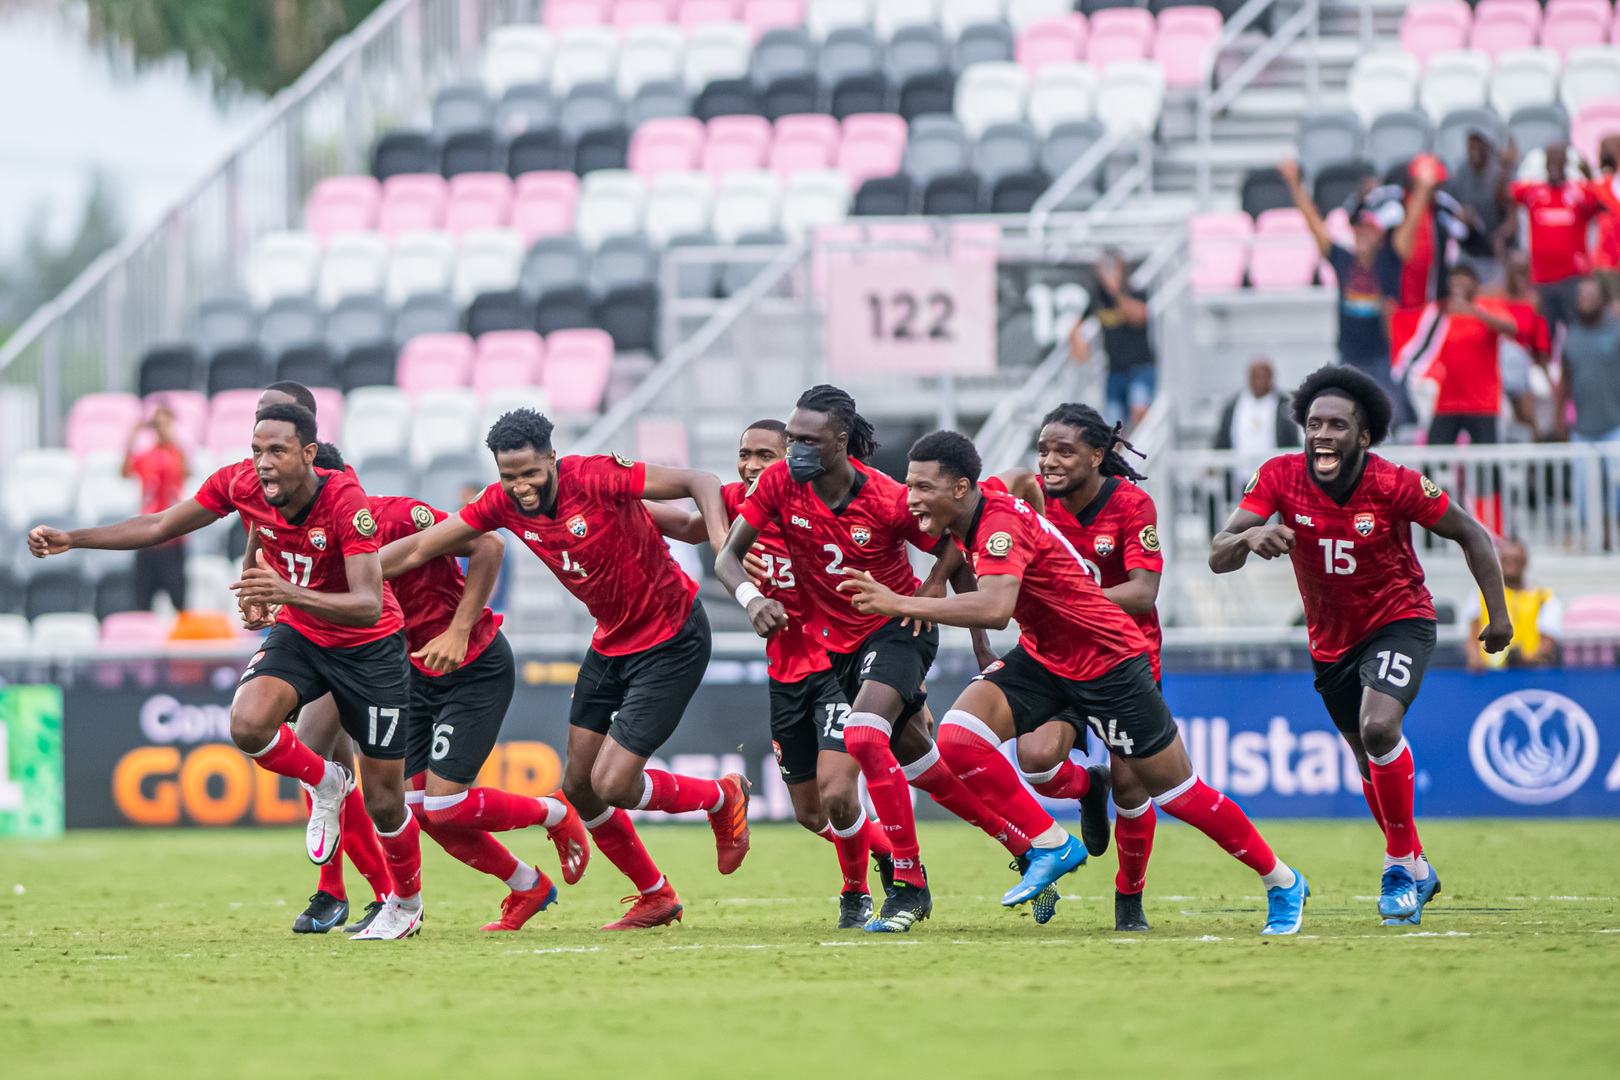 Soca Warriors qualifies for 2021 Gold Cup group stage